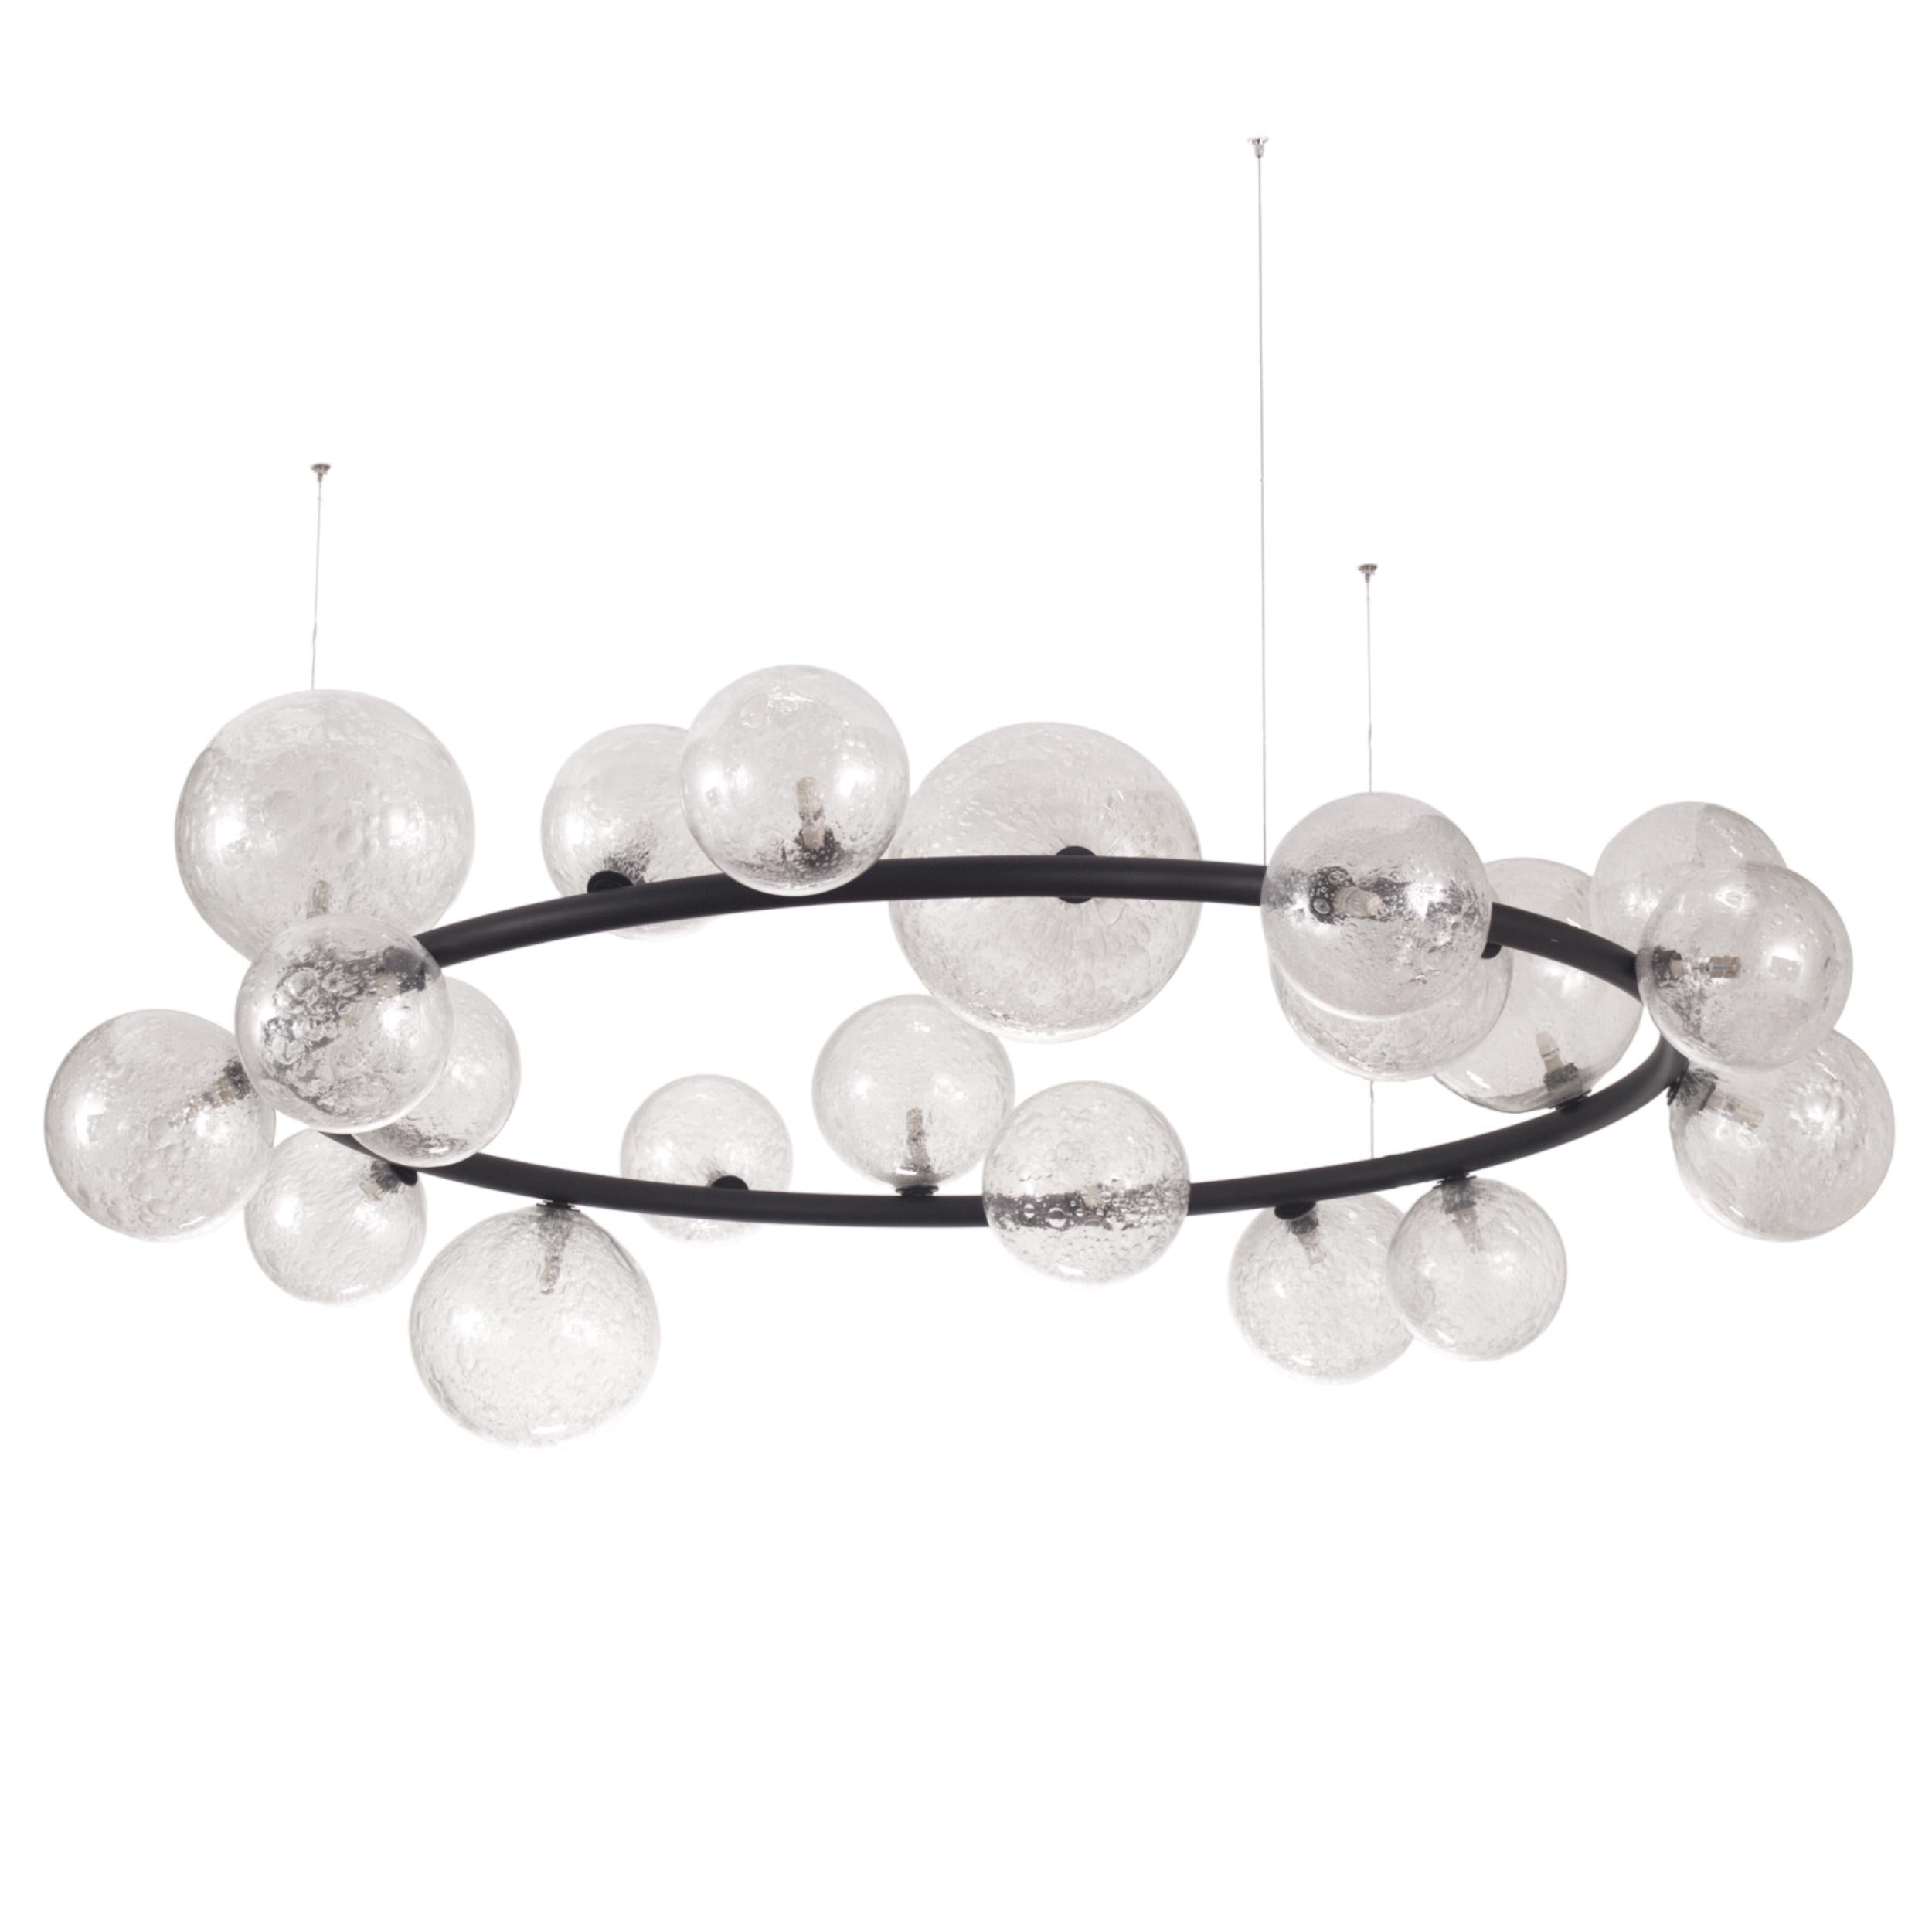 Artistic Suspension Ring lamp Murano Glass Spheres Black Fixture by Multiforme For Sale